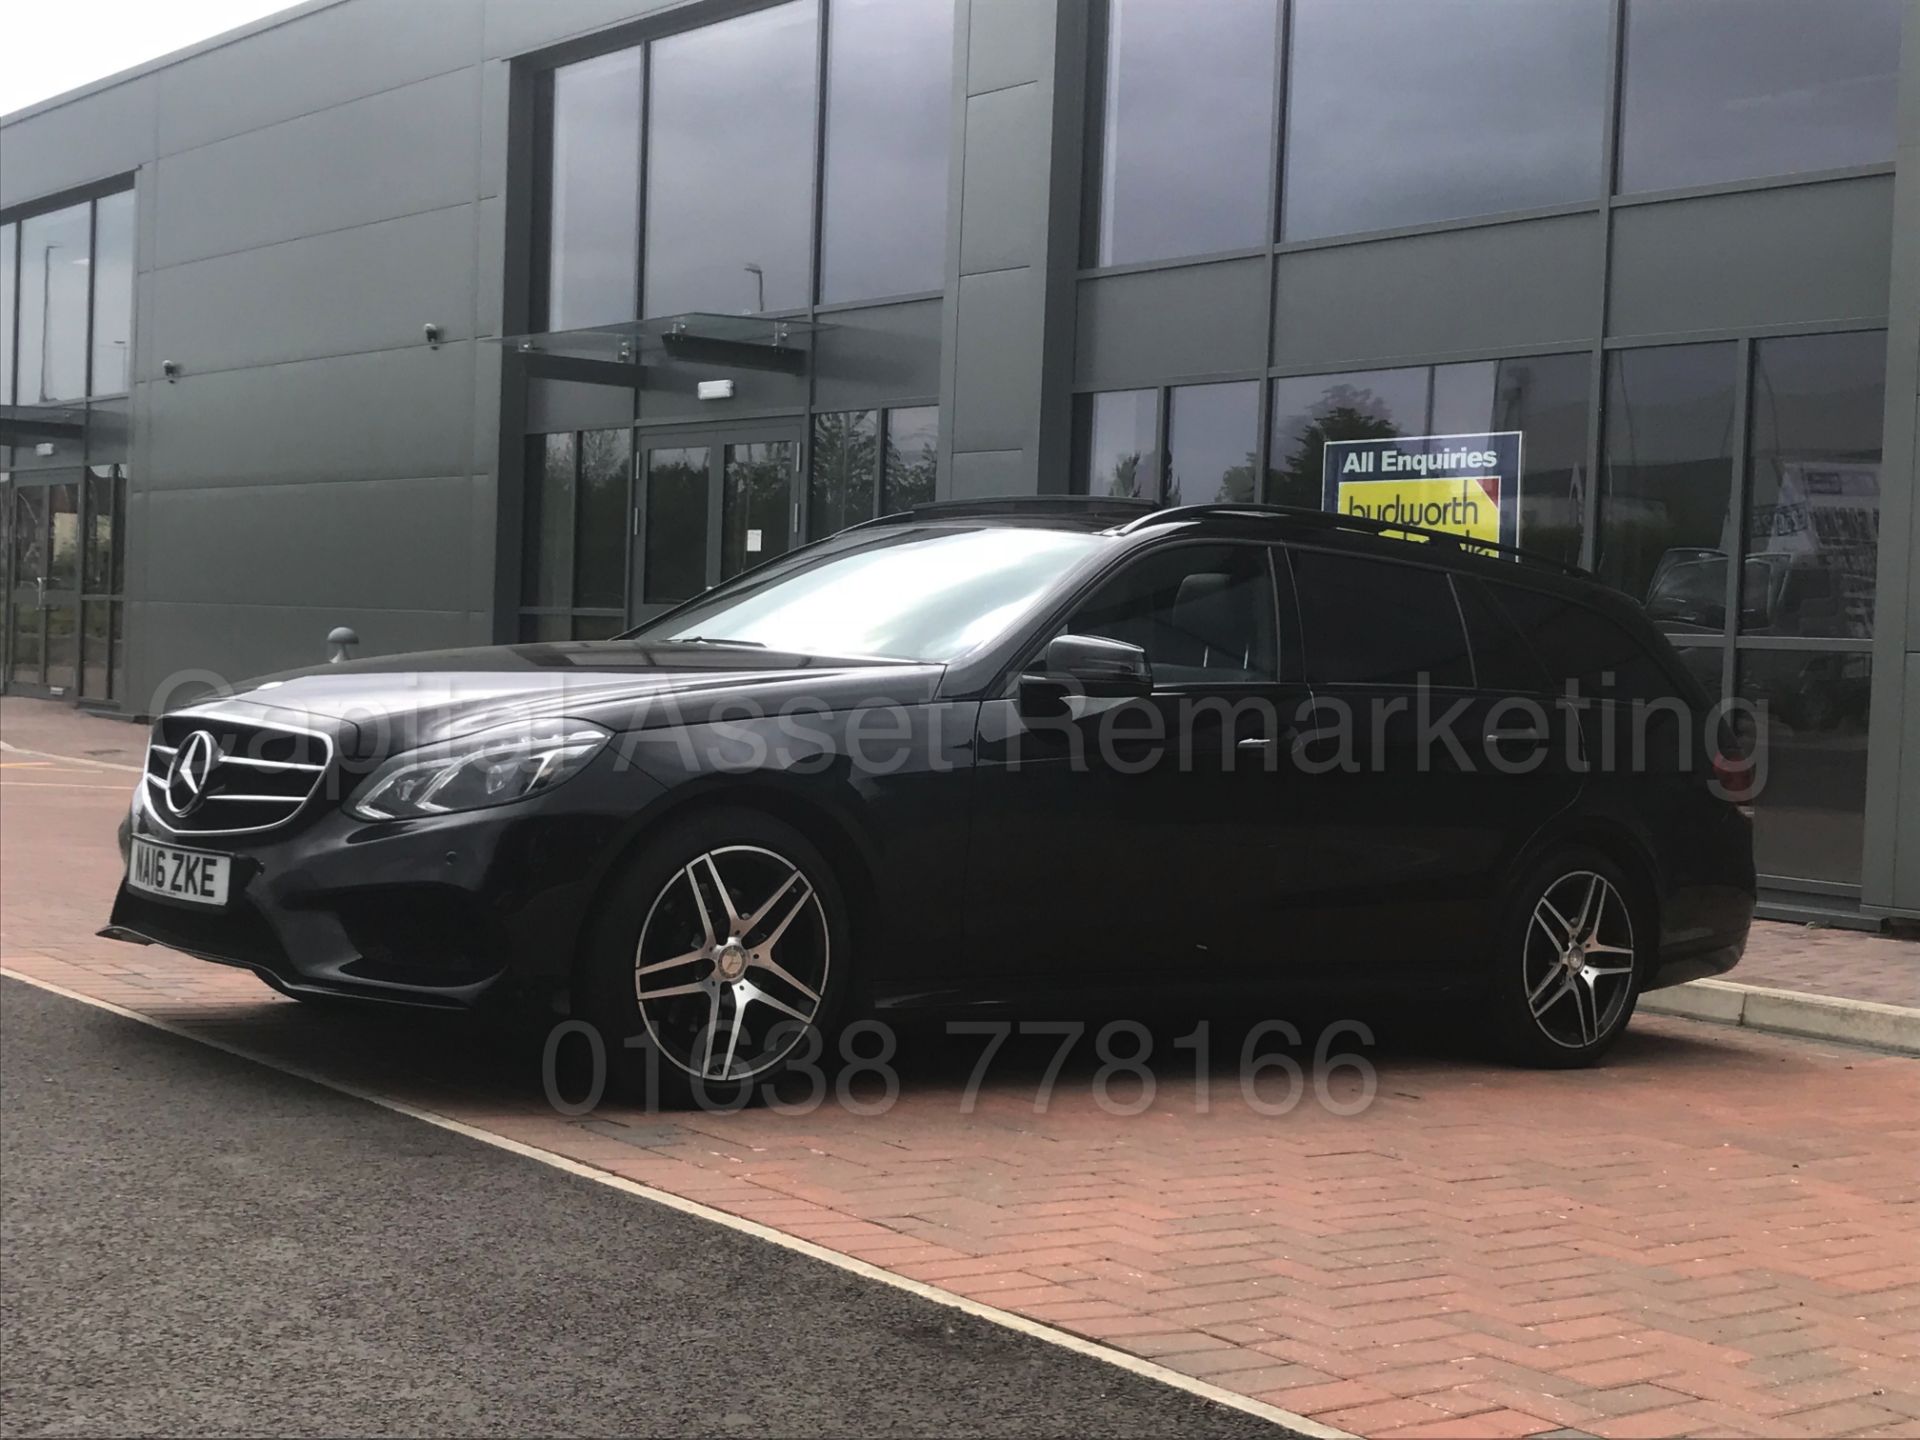 (On Sale)MERCEDES-BENZ E220D 'AMG NIGHT EDITION - PREMIUM' (2016) 'AUTO' - LEATHER - NAV - PAN ROOF* - Image 6 of 50